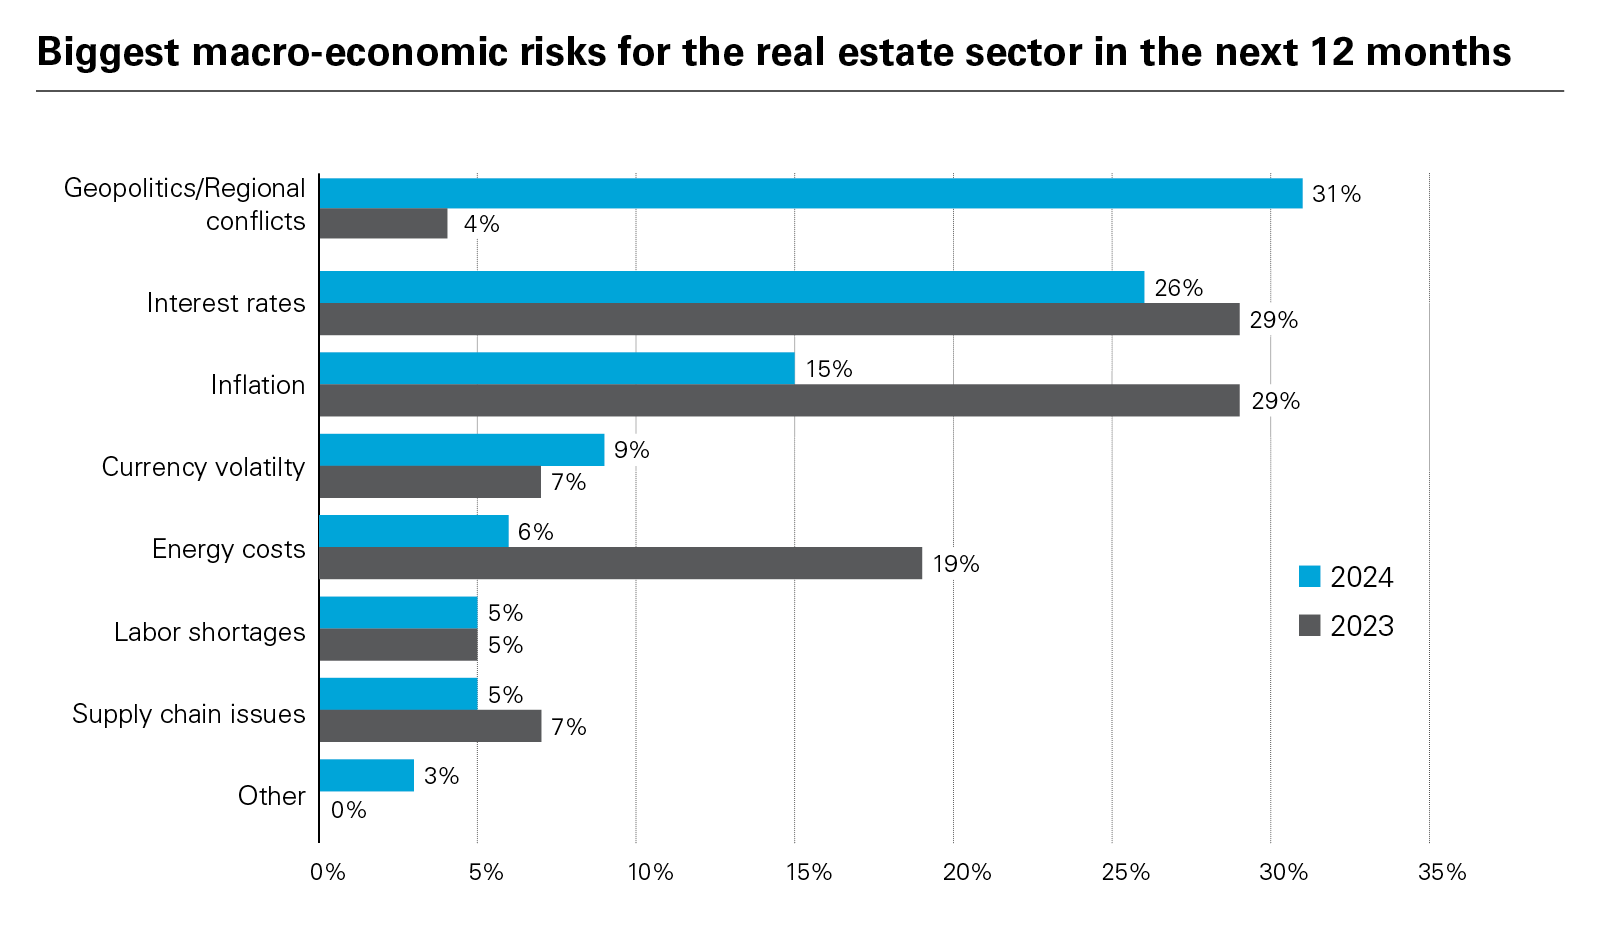 Biggest macro-economic risks for the real estate sector in the next 12 months